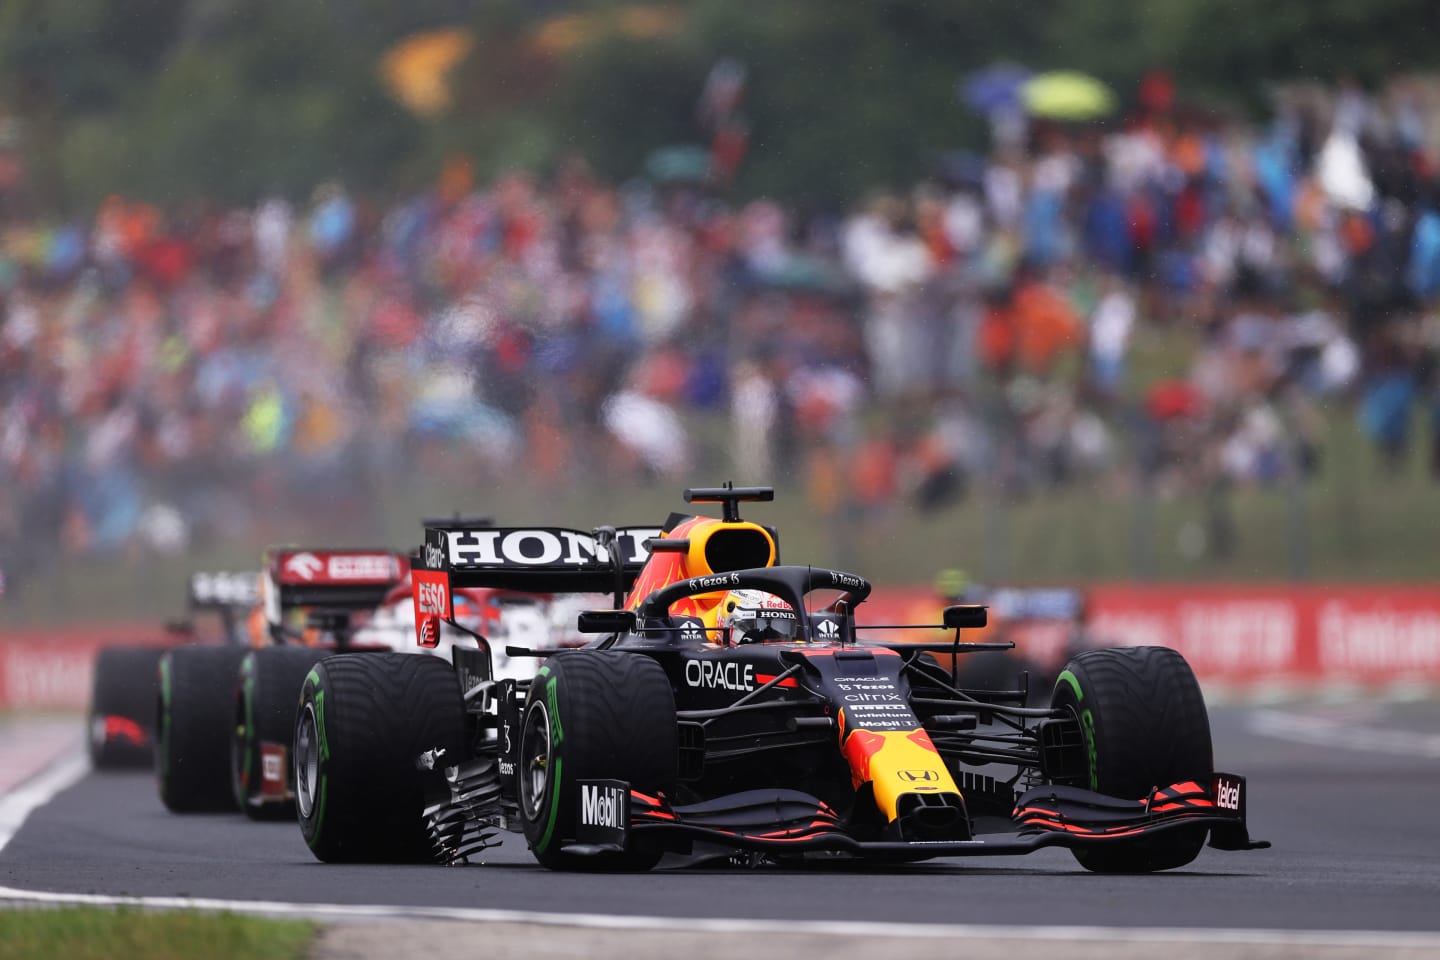 BUDAPEST, HUNGARY - AUGUST 01: Max Verstappen of the Netherlands driving the (33) Red Bull Racing